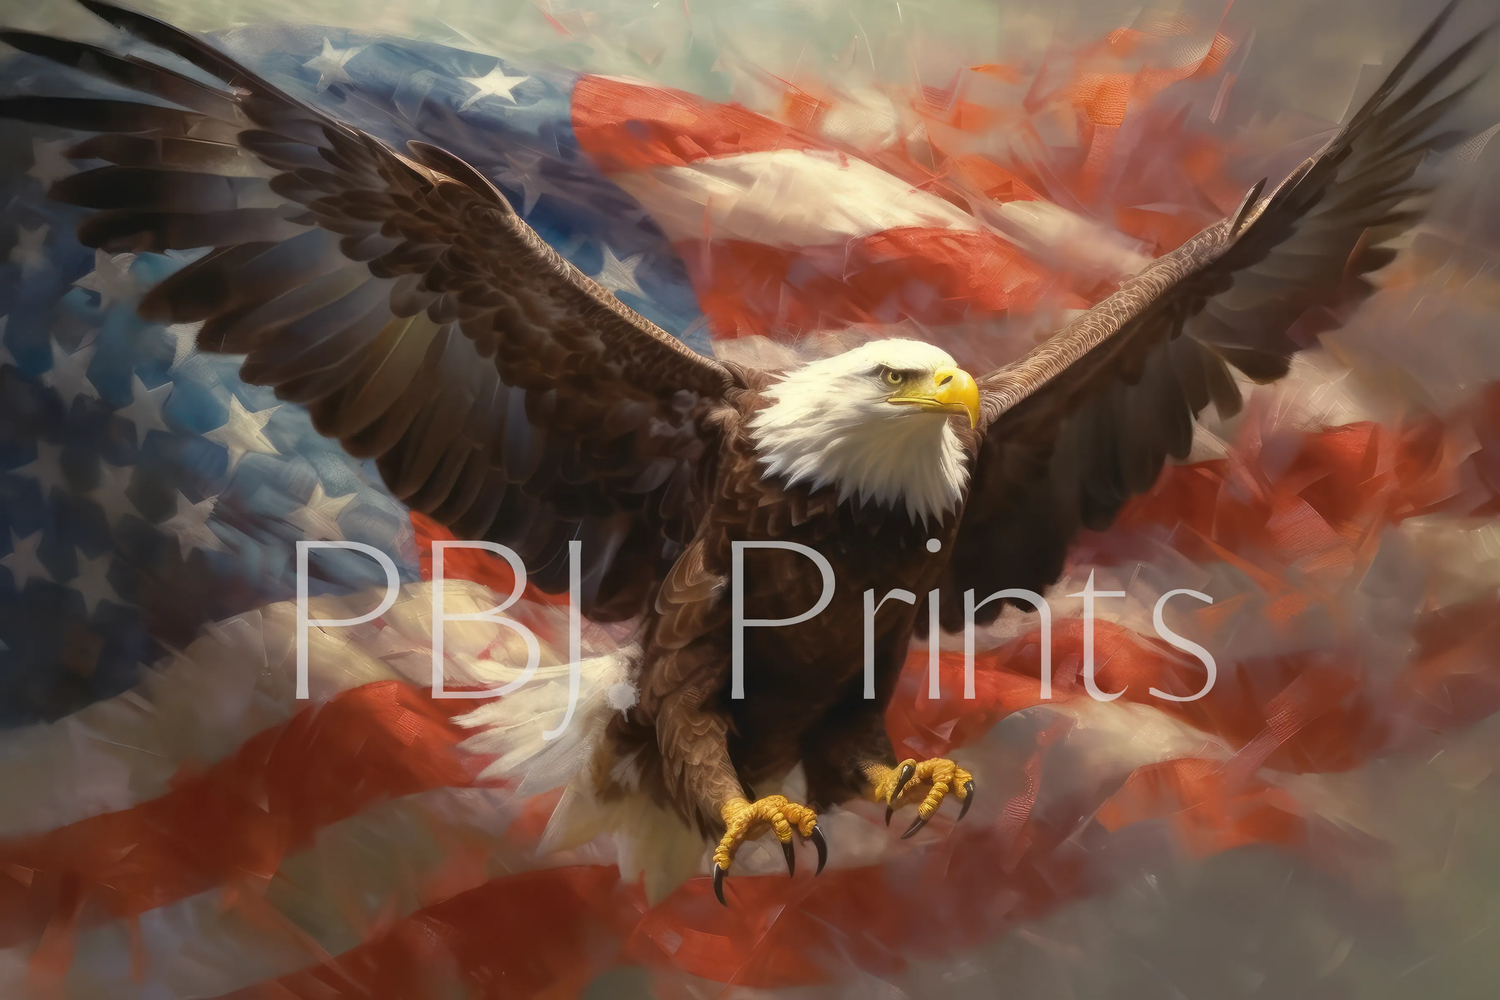 Spirit of Freedom - Artist by Whimsykel Designs - Art Prints, Decoupage Rice Paper, Flat Canvas Prints, Giclee Prints, Photo Prints, Poster Prints